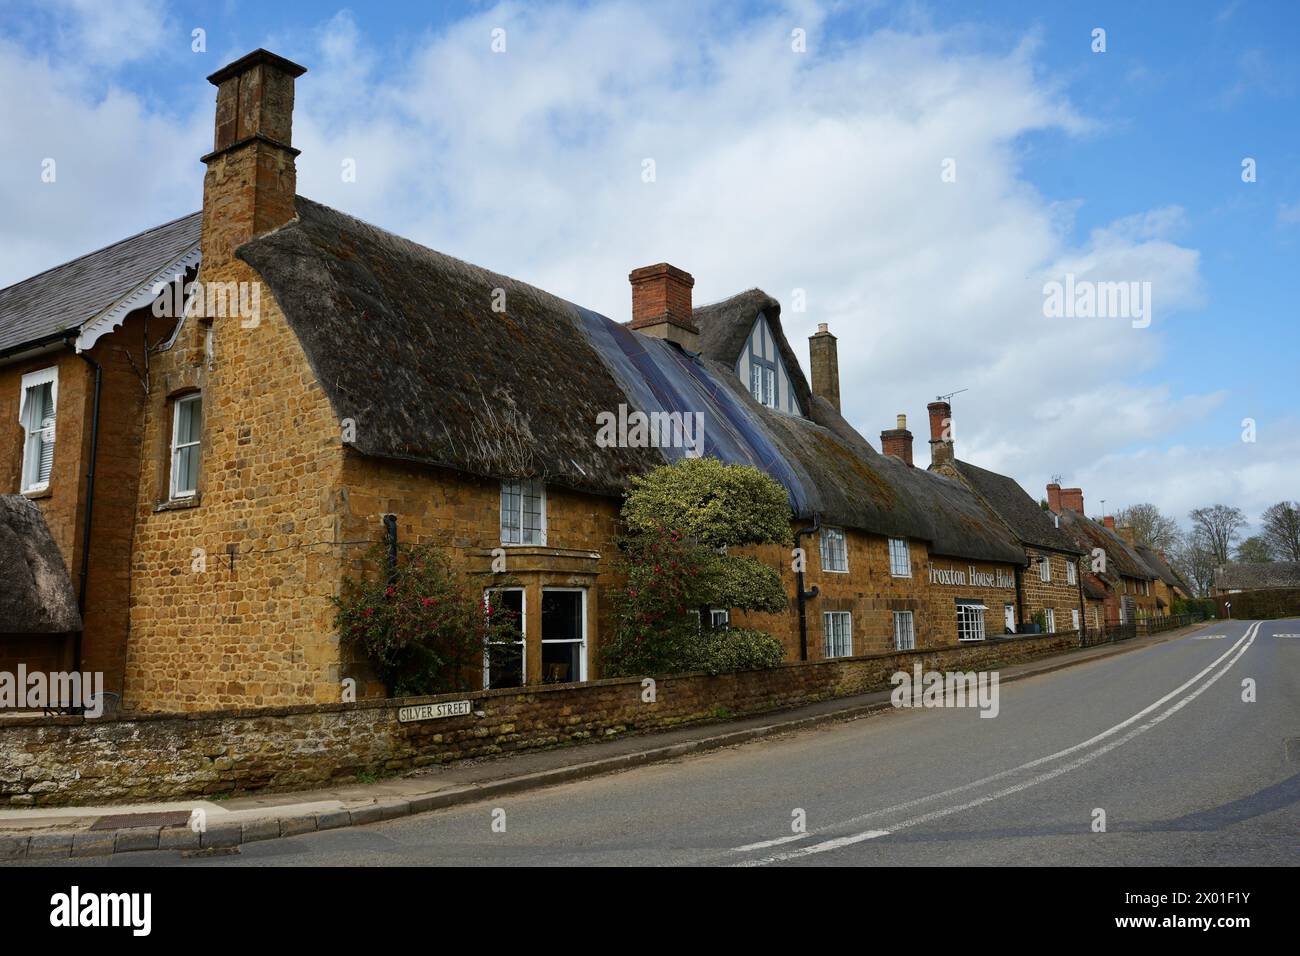 The Wroxton House Hotel is on Stratford Road. It is formed from four cottages, dating from the 17th to the 19th centuries. Stock Photo